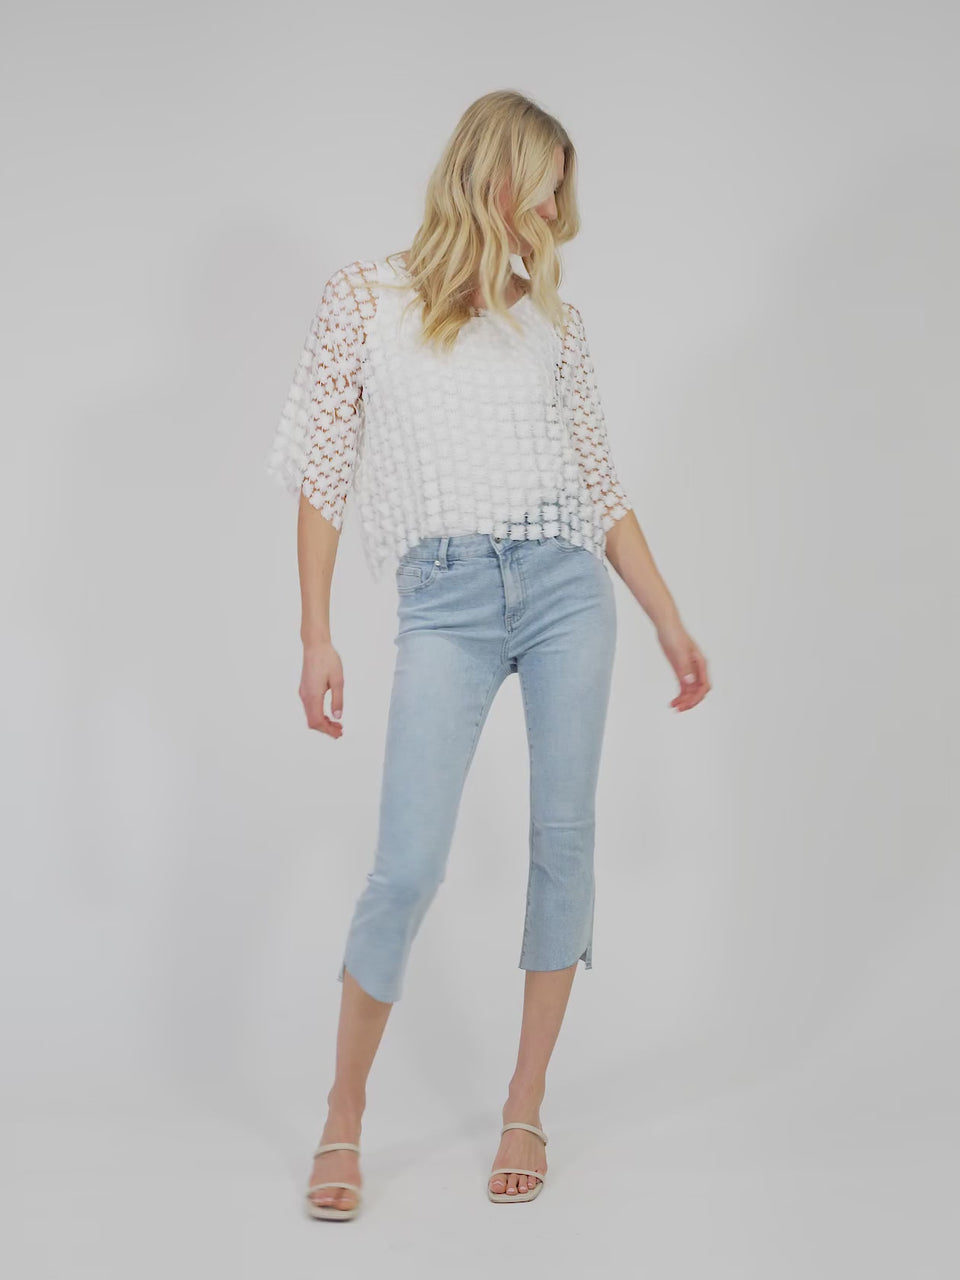 Textured Crochet Flower Top - White - Charlie B Collection Canada - Video